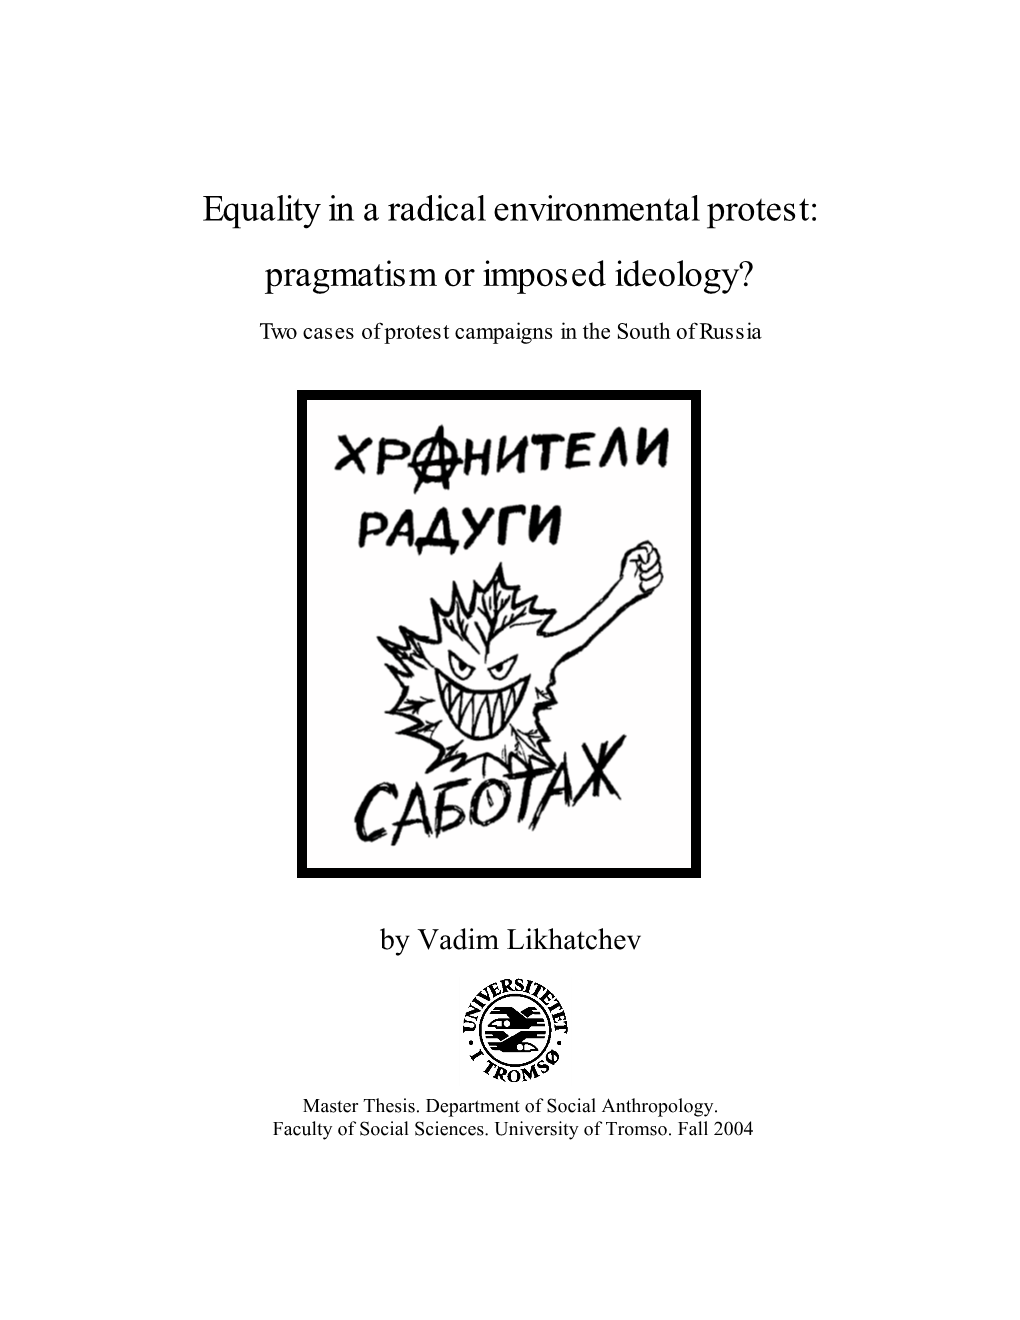 Equality in a Radical Environmental Protest: Pragmatism Or Imposed Ideology?